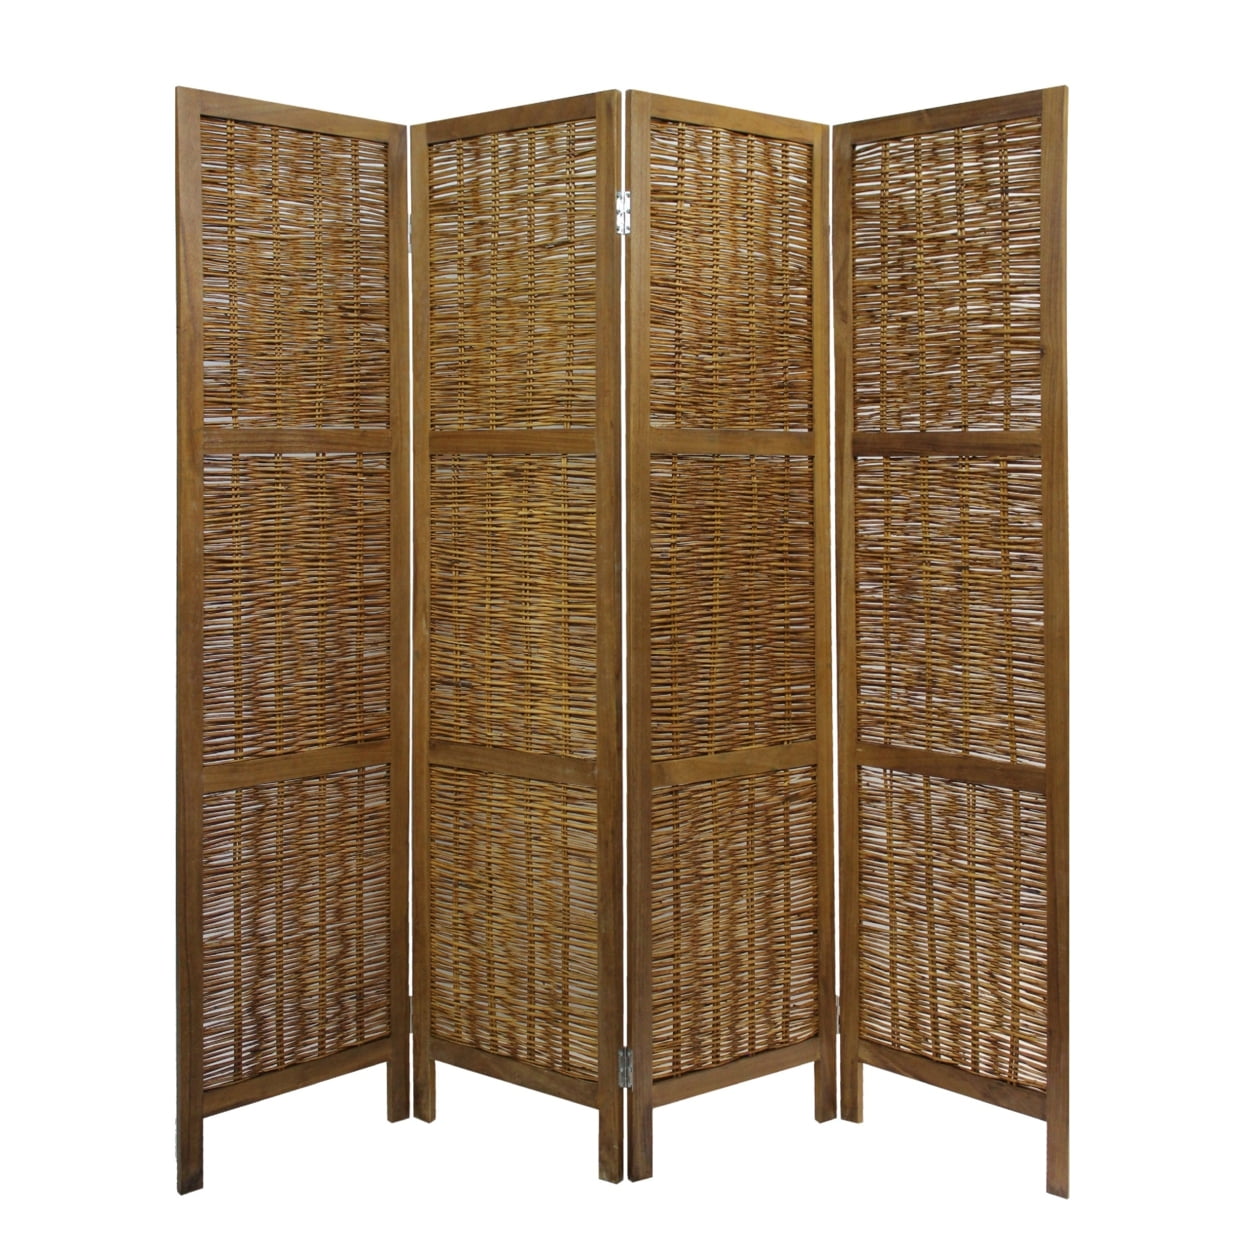 Picture of Benjara BM276724 68 in. Cottage Style 4 Panel Screen Room Divider - Willow Weaving, Brown